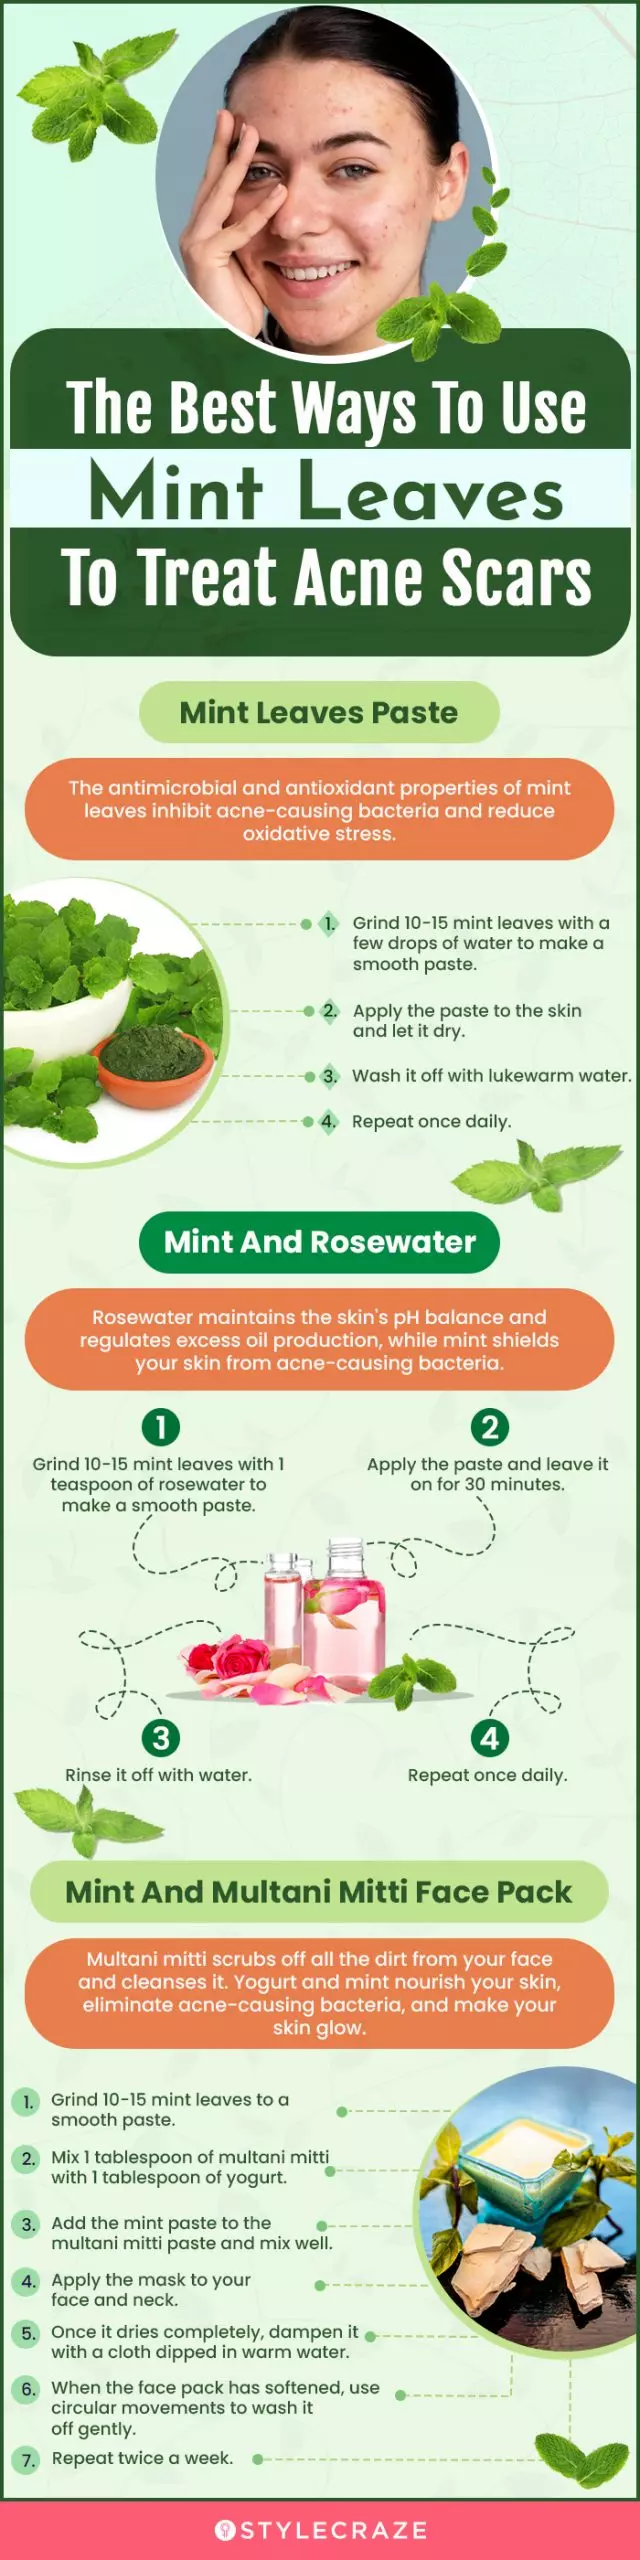 the best ways to use mint leaves to treat acne scars (infographic)